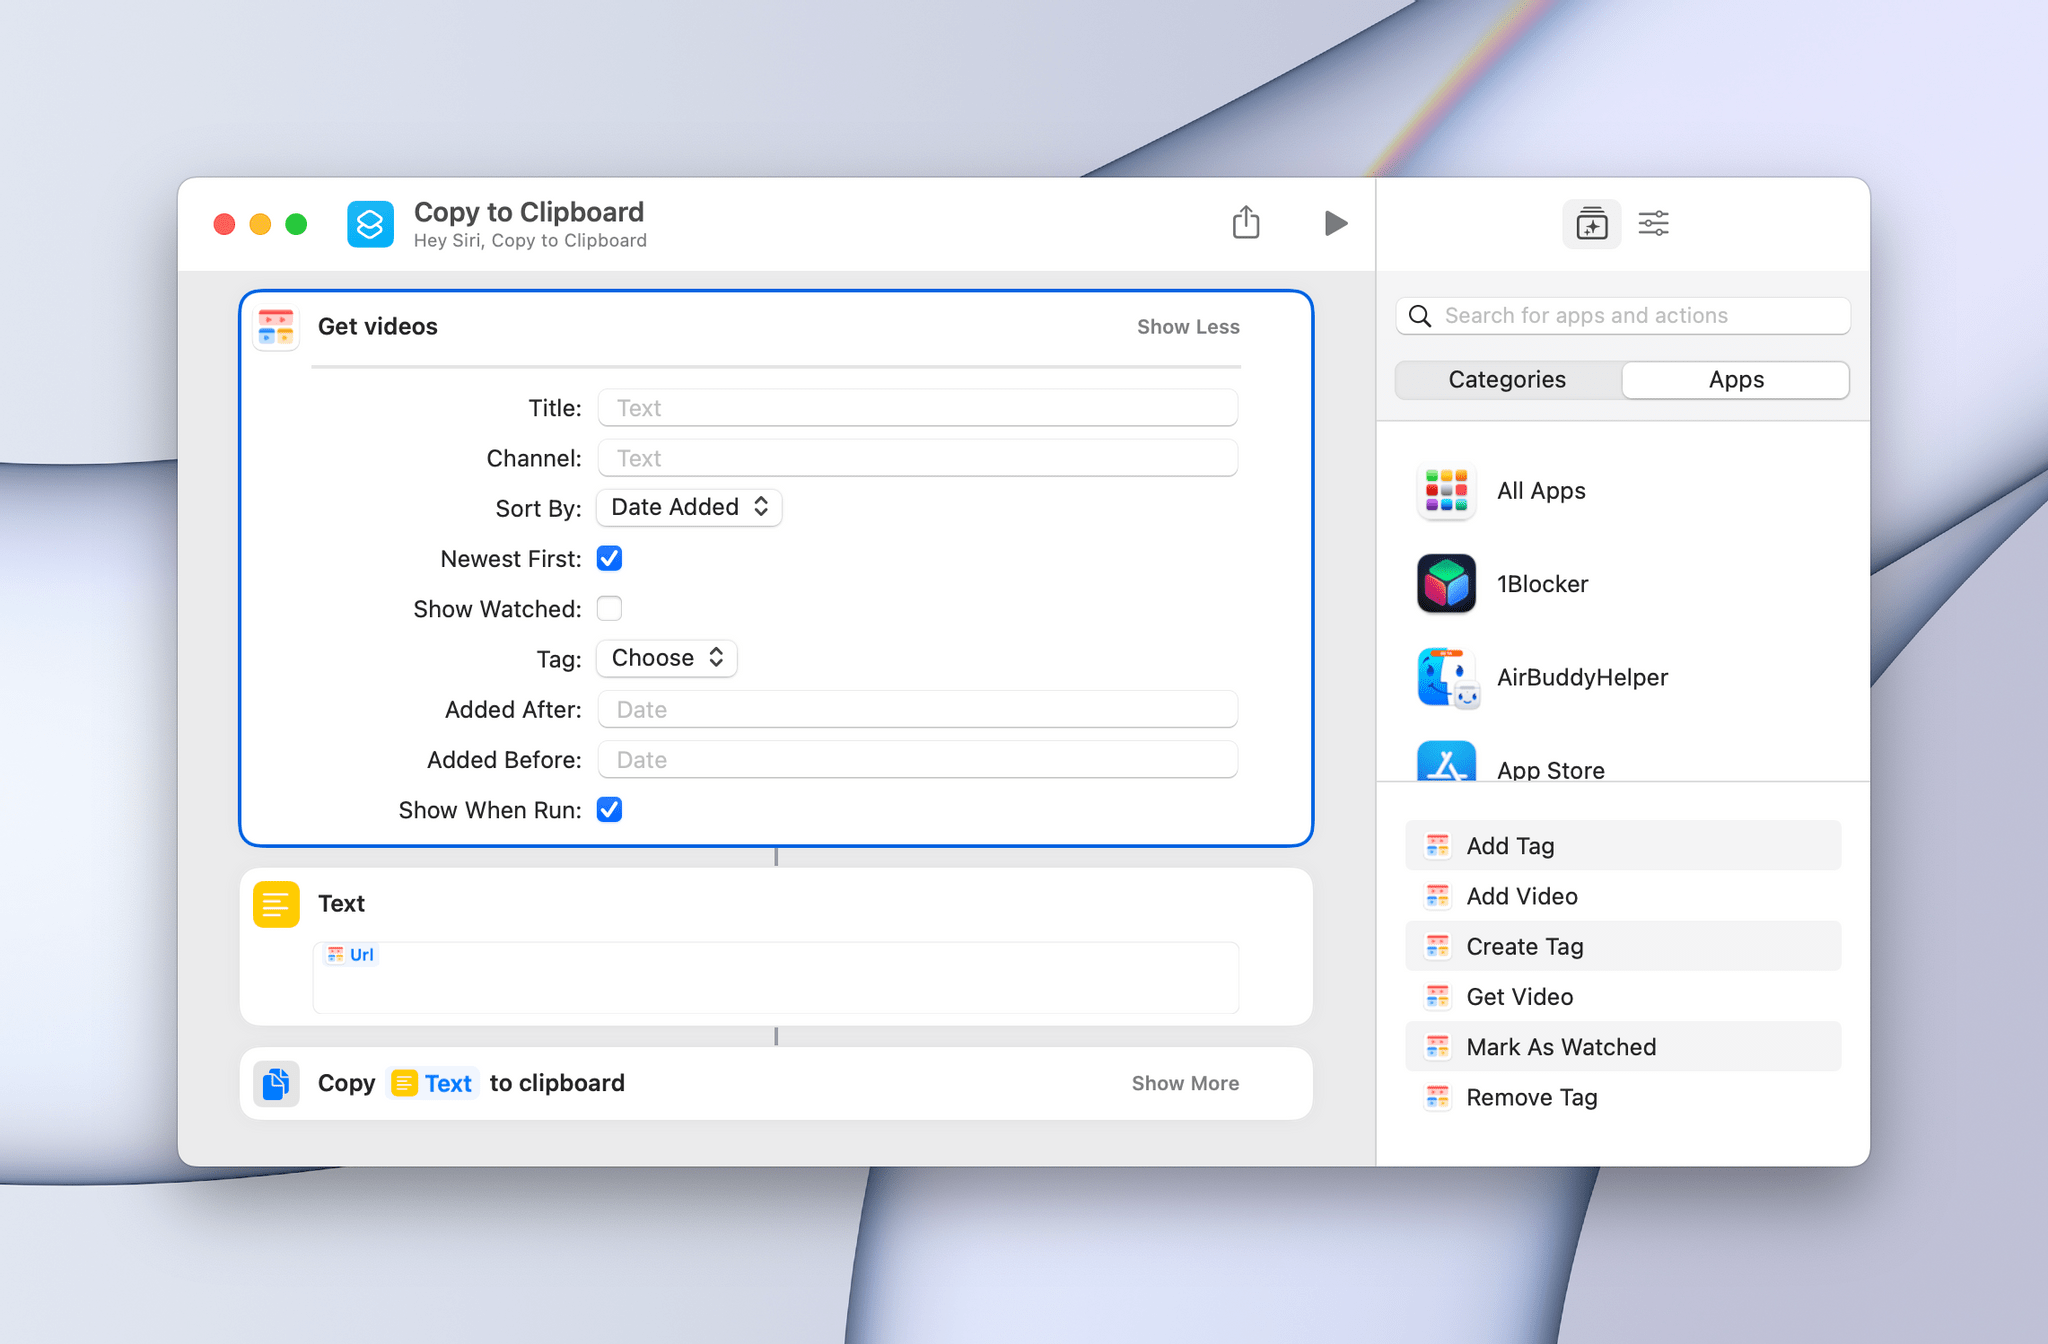 Play features a terrific set of Shortcuts actions.